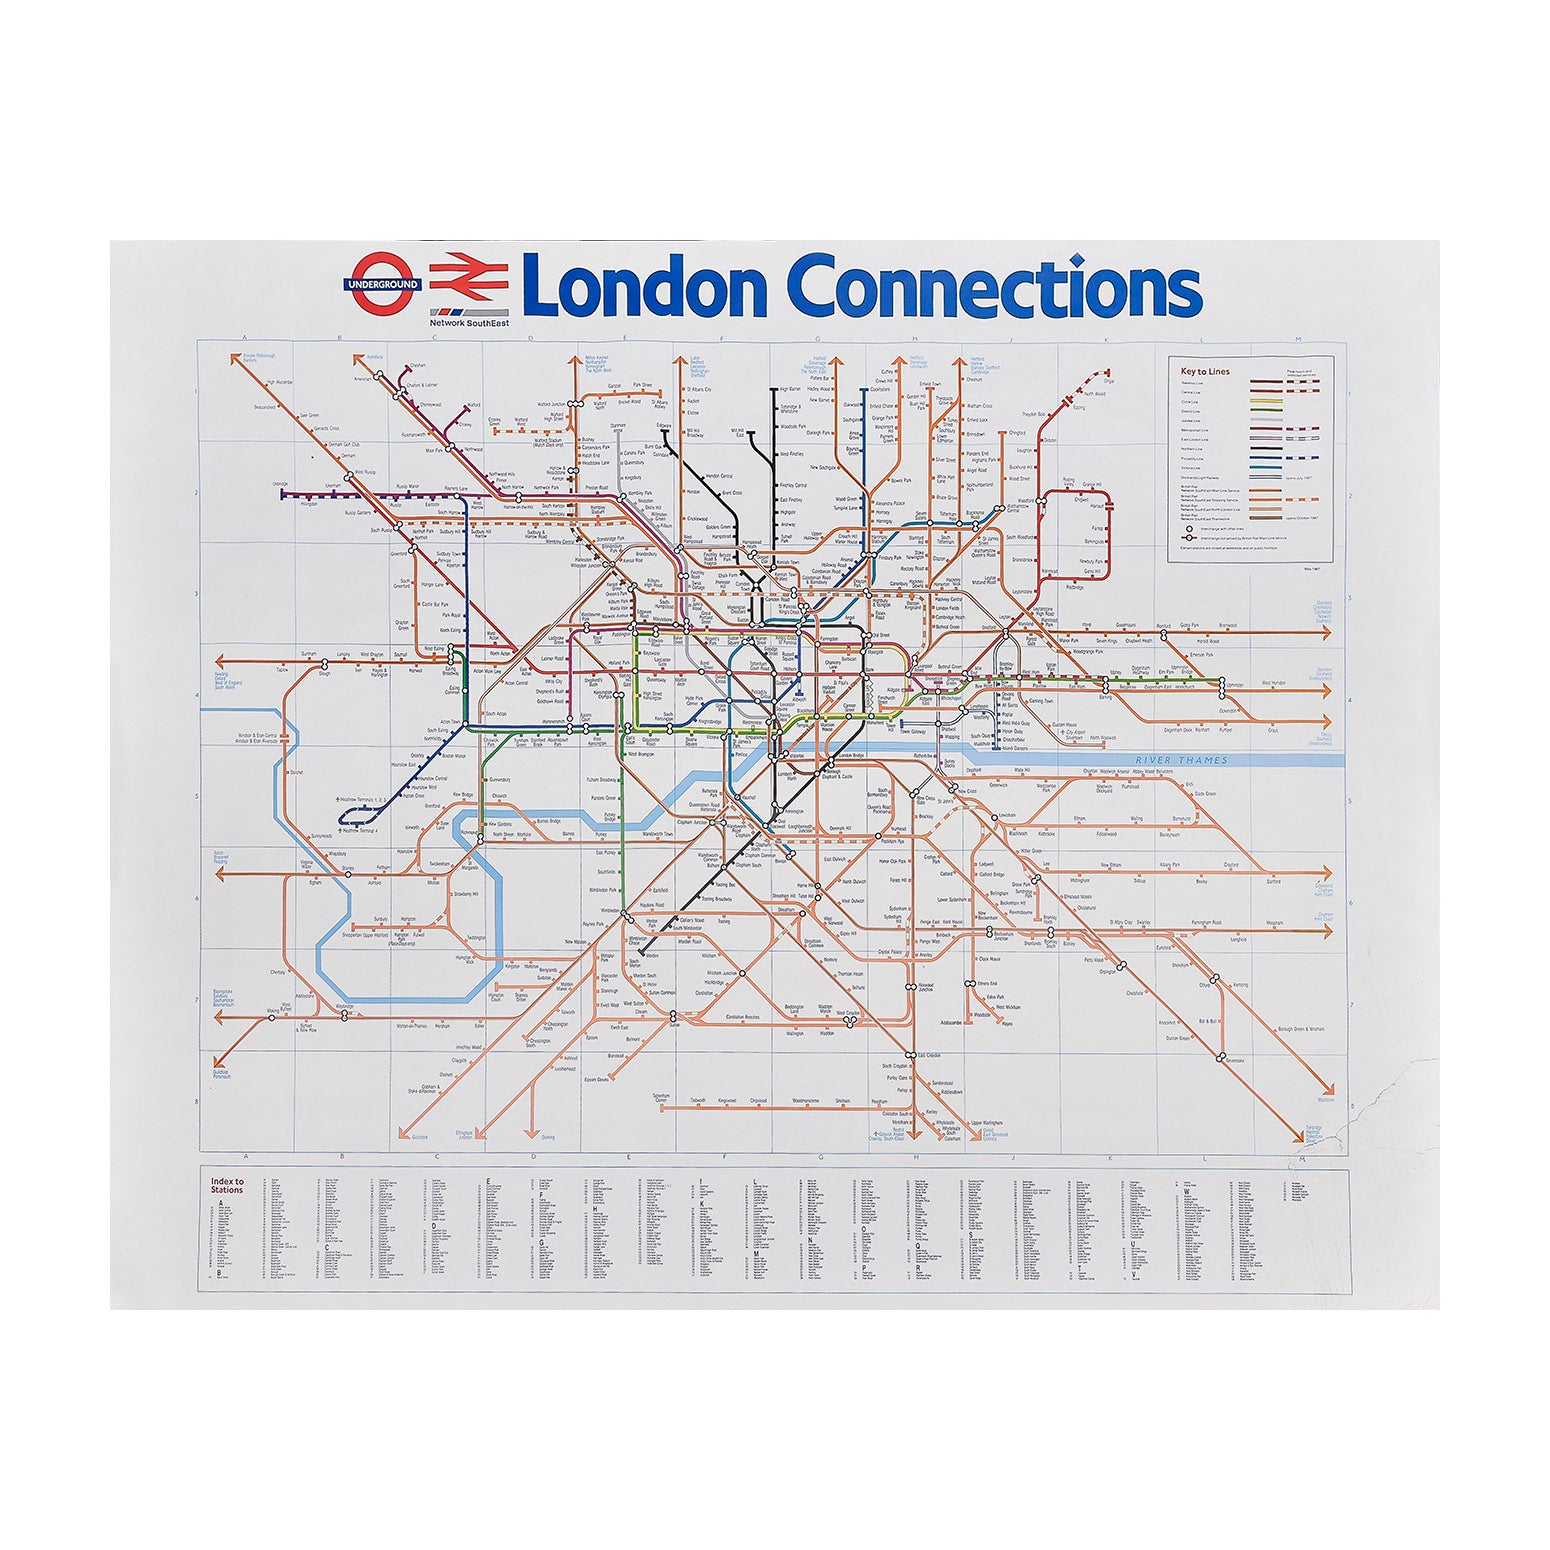  large format station poster map showing both the London Underground and the connecting national rail network for the Greater London area, 1987